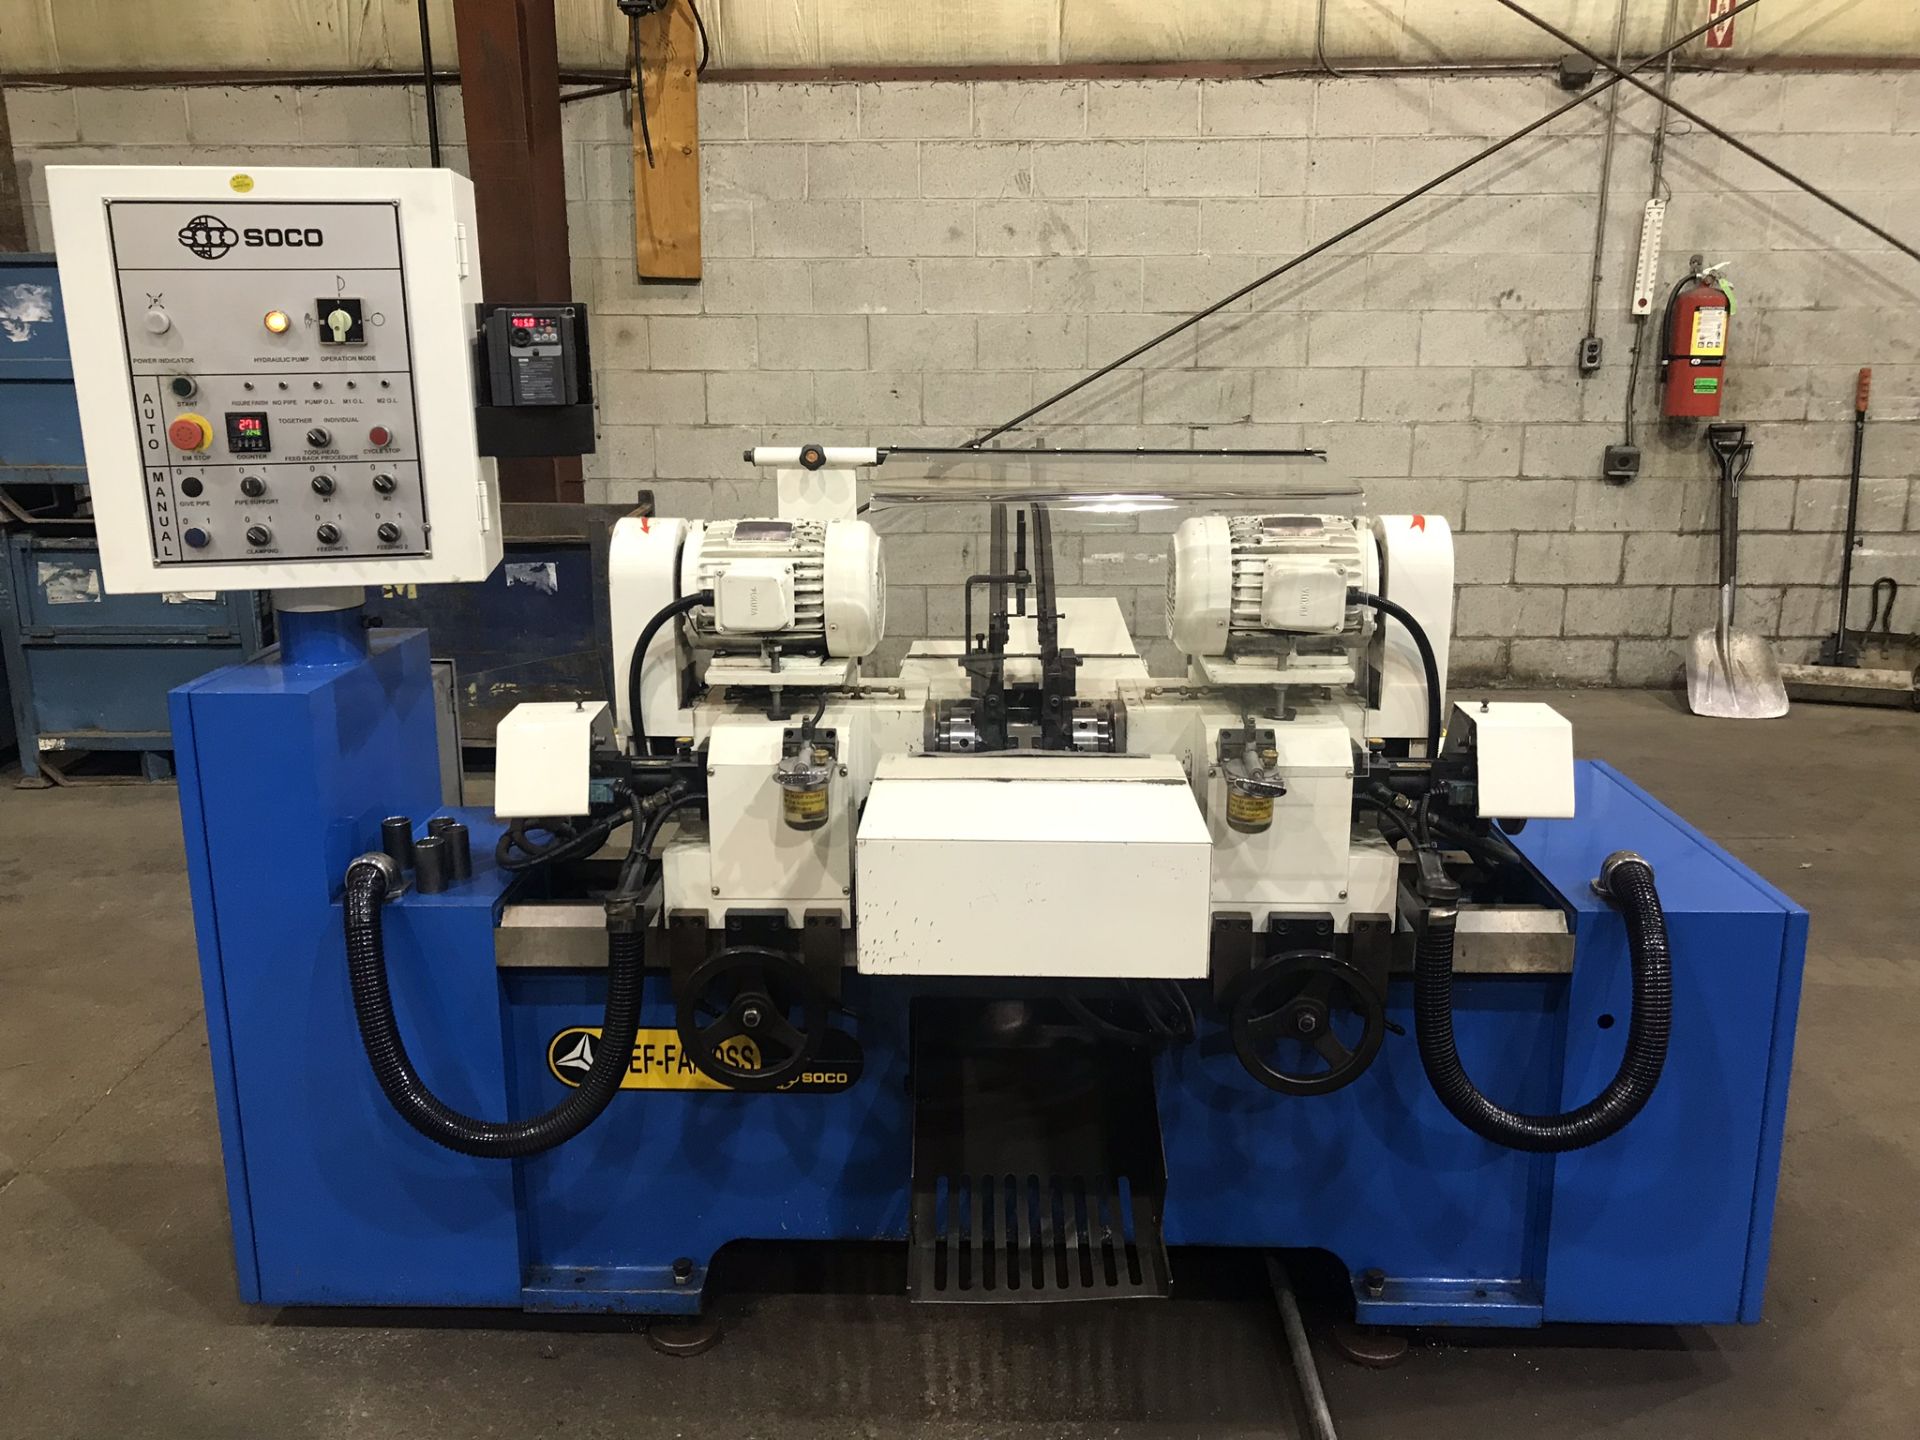 Soco Double Ended Chamfering / Finishing Machine Model # DEF-FA/60SS, (2008)